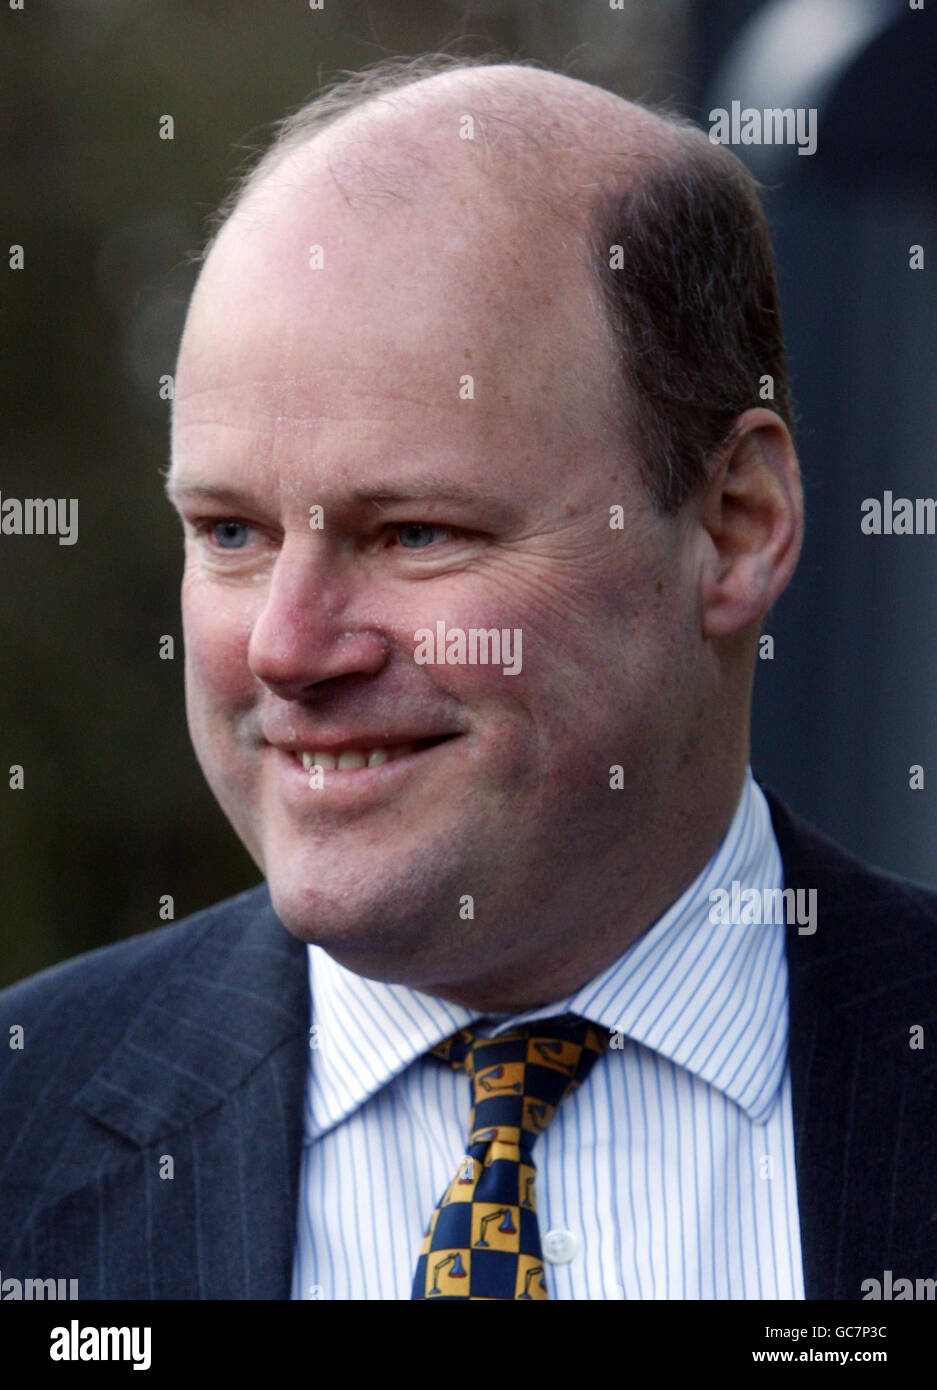 RBS Chief Executive Stephen Hester arrives at a Royal Bank of Scotland Conference Centre base at RBS in Gogarburn near Edinburgh, for a meeting with shareholders to approve participation in the Government's asset protection scheme. Stock Photo